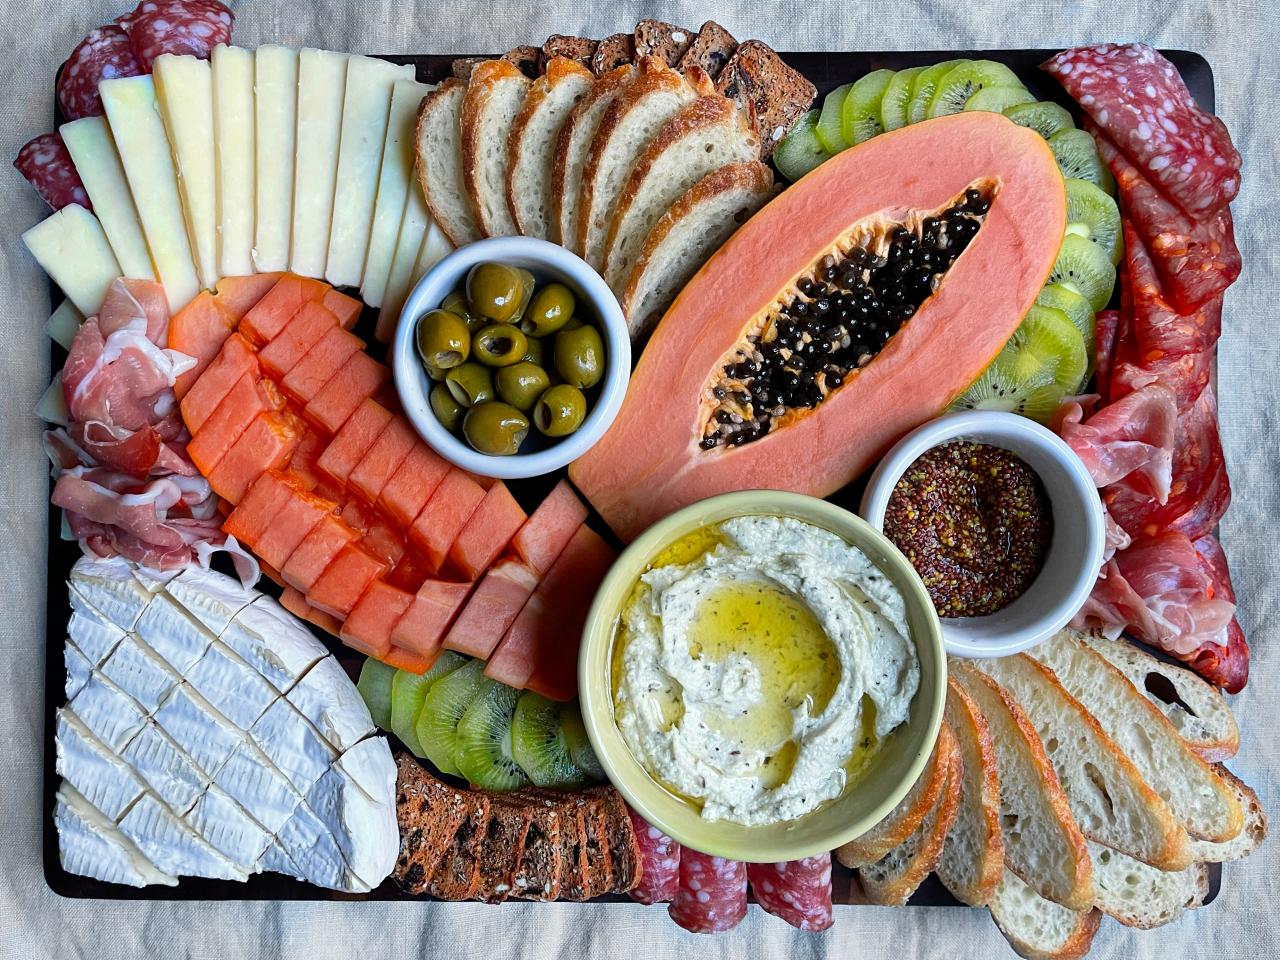 https://food.fnr.sndimg.com/content/dam/images/food/fullset/2021/02/26/giant-cheese-and-charcuterie-board.jpg.rend.hgtvcom.1280.960.suffix/1614607289202.jpeg